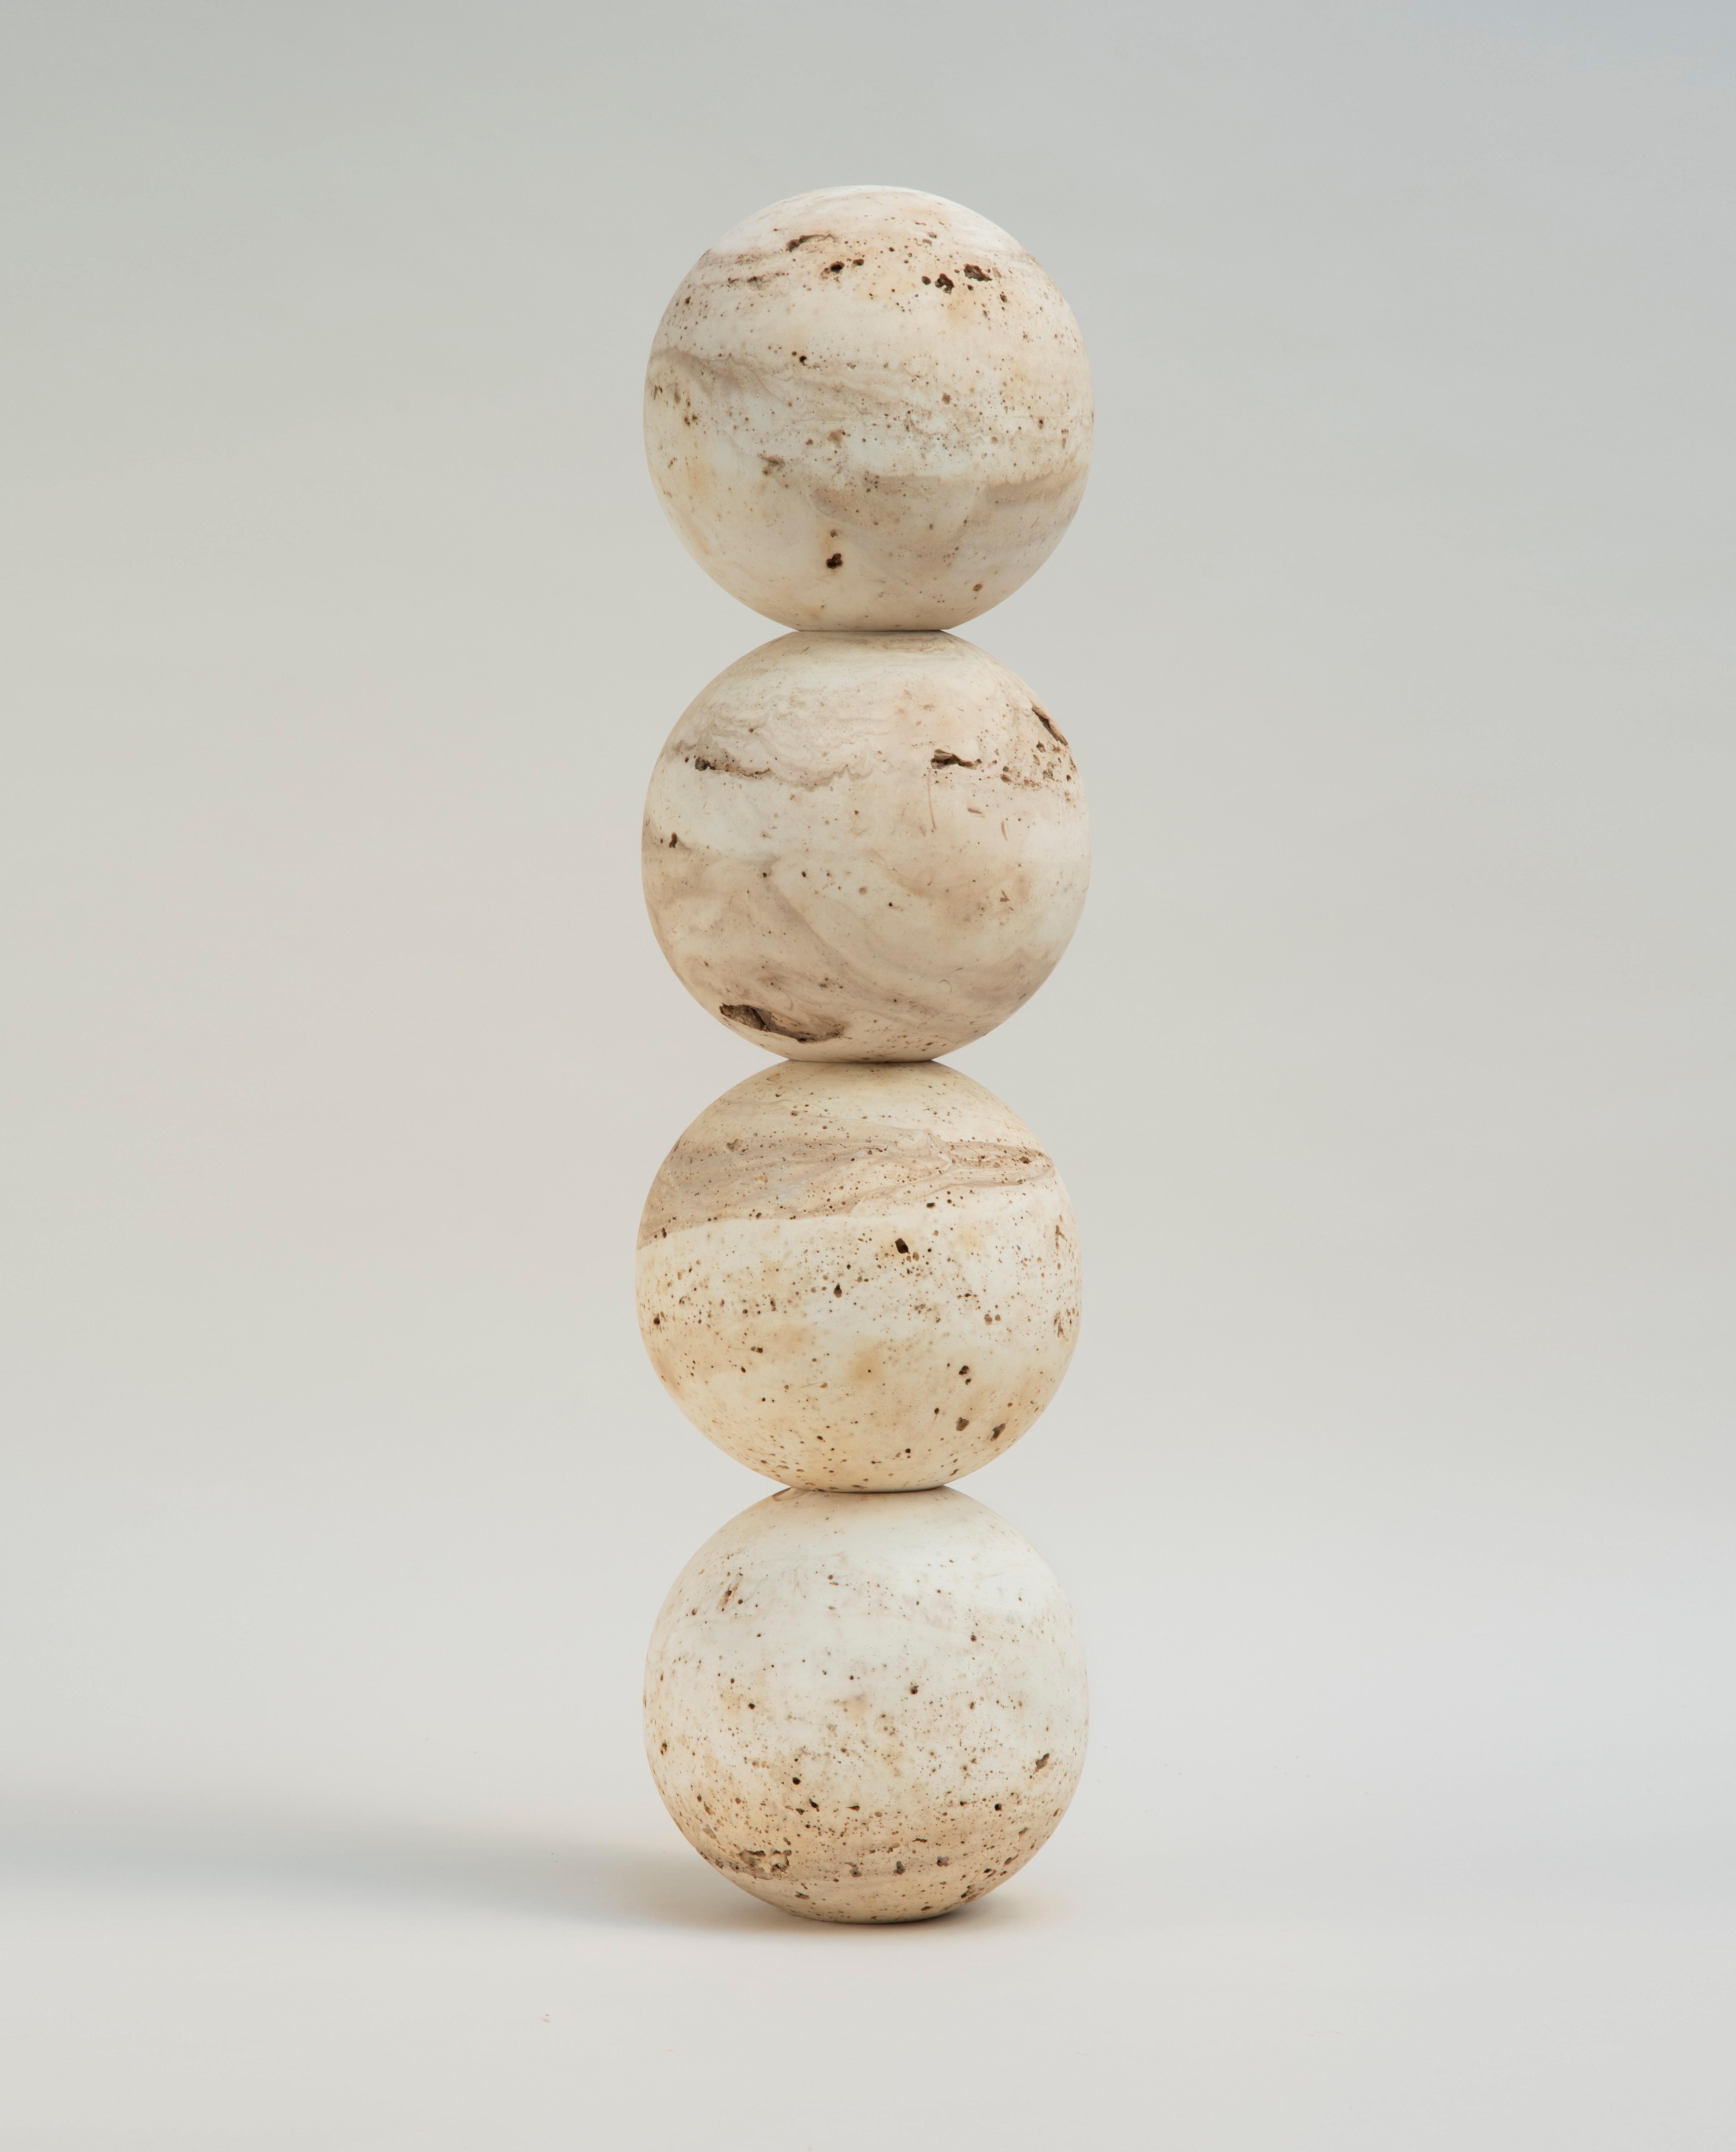 Jupiter 4 by Turbina
Future archeology
Dimensions: Ø 19.5 cm x H 77 cm
Materials: Cast Stone

Jupiter project arises from the idea of the stone as symbol of sacredness. Therefore Jupiter is a modular piece composed by spheres and semispheres